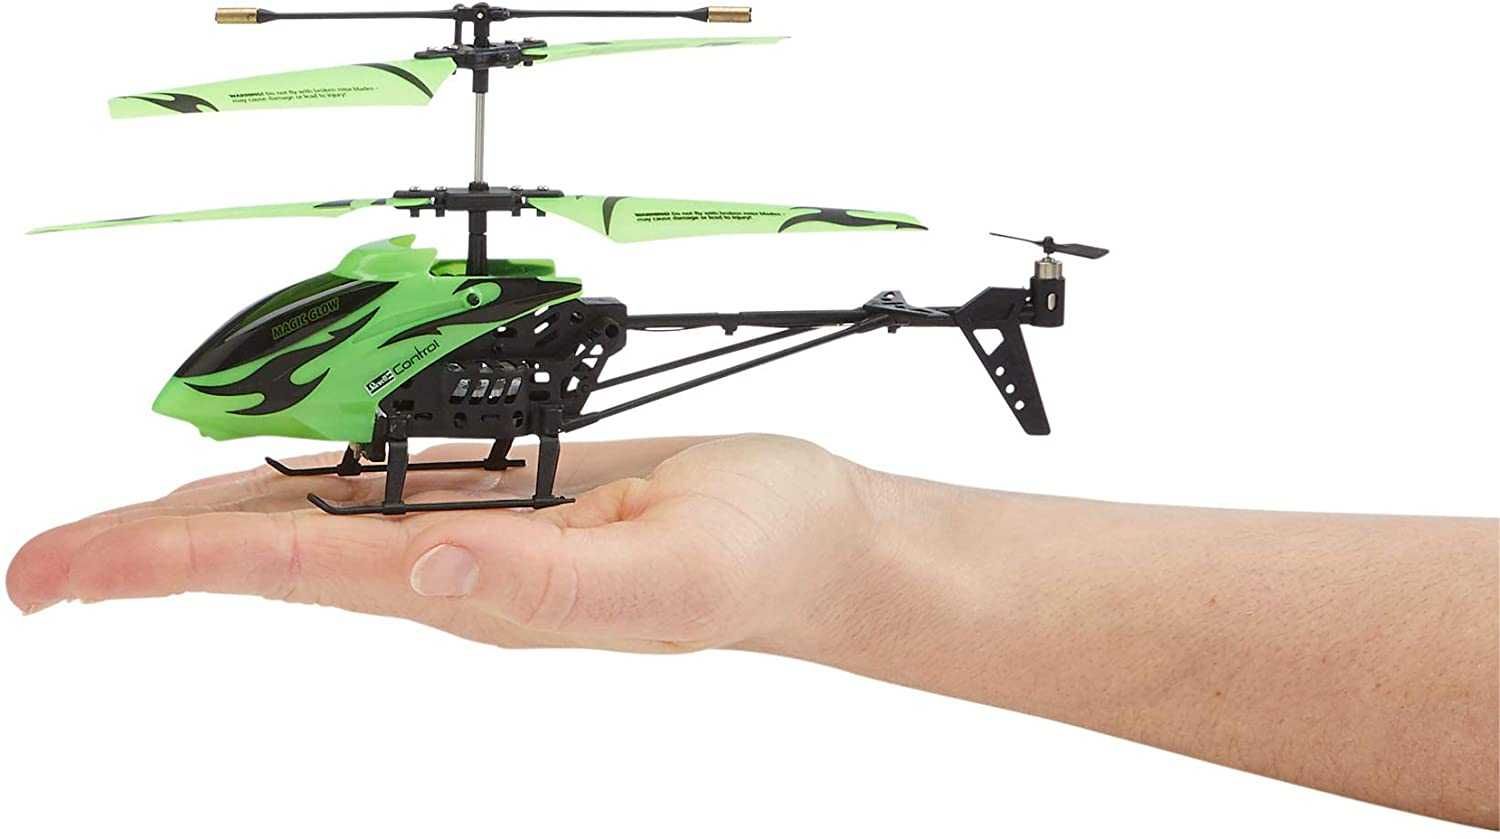 Revell Control 23940 Helikopter Glowee 2.0